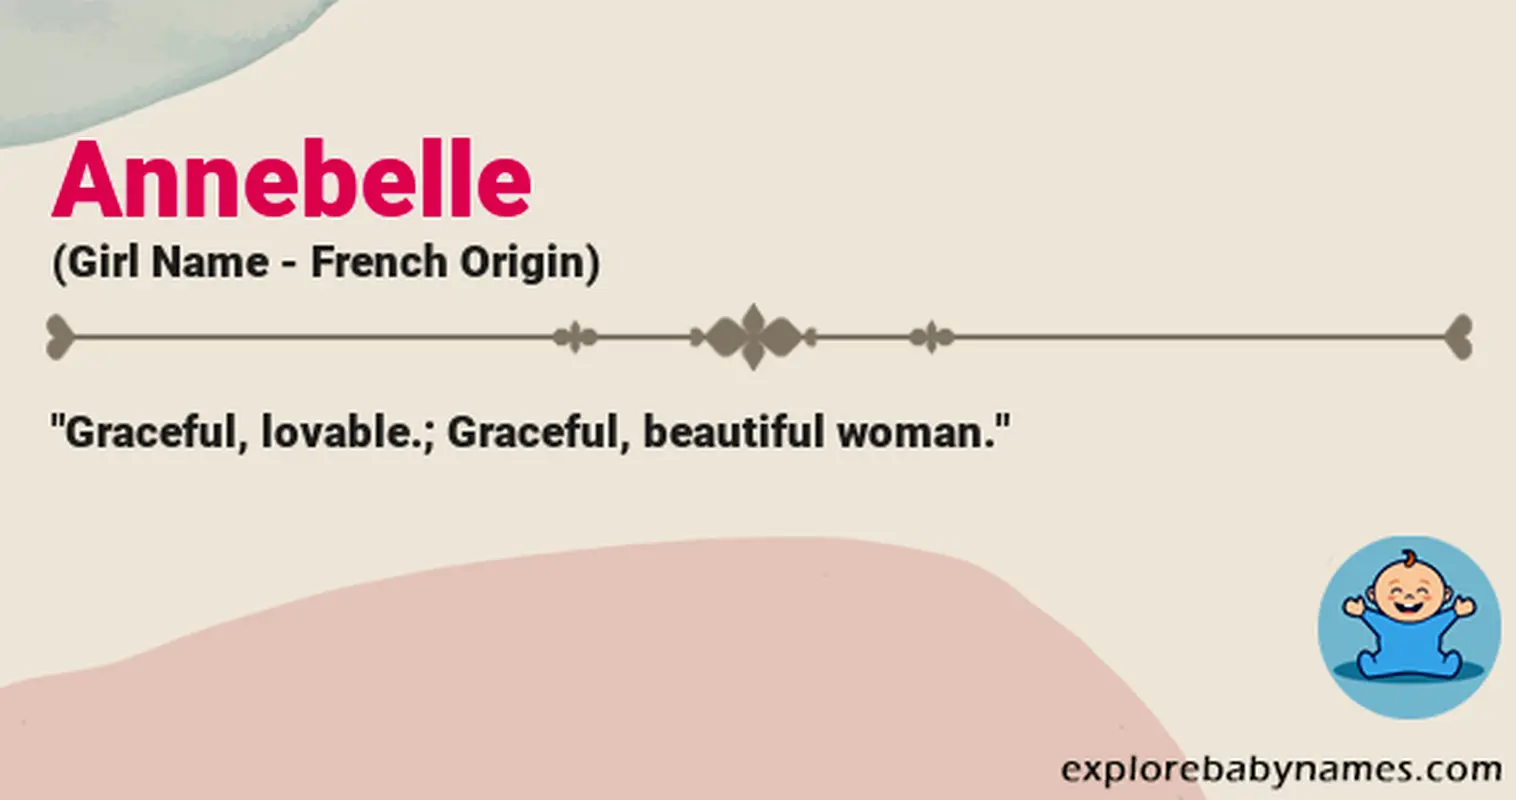 Meaning of Annebelle